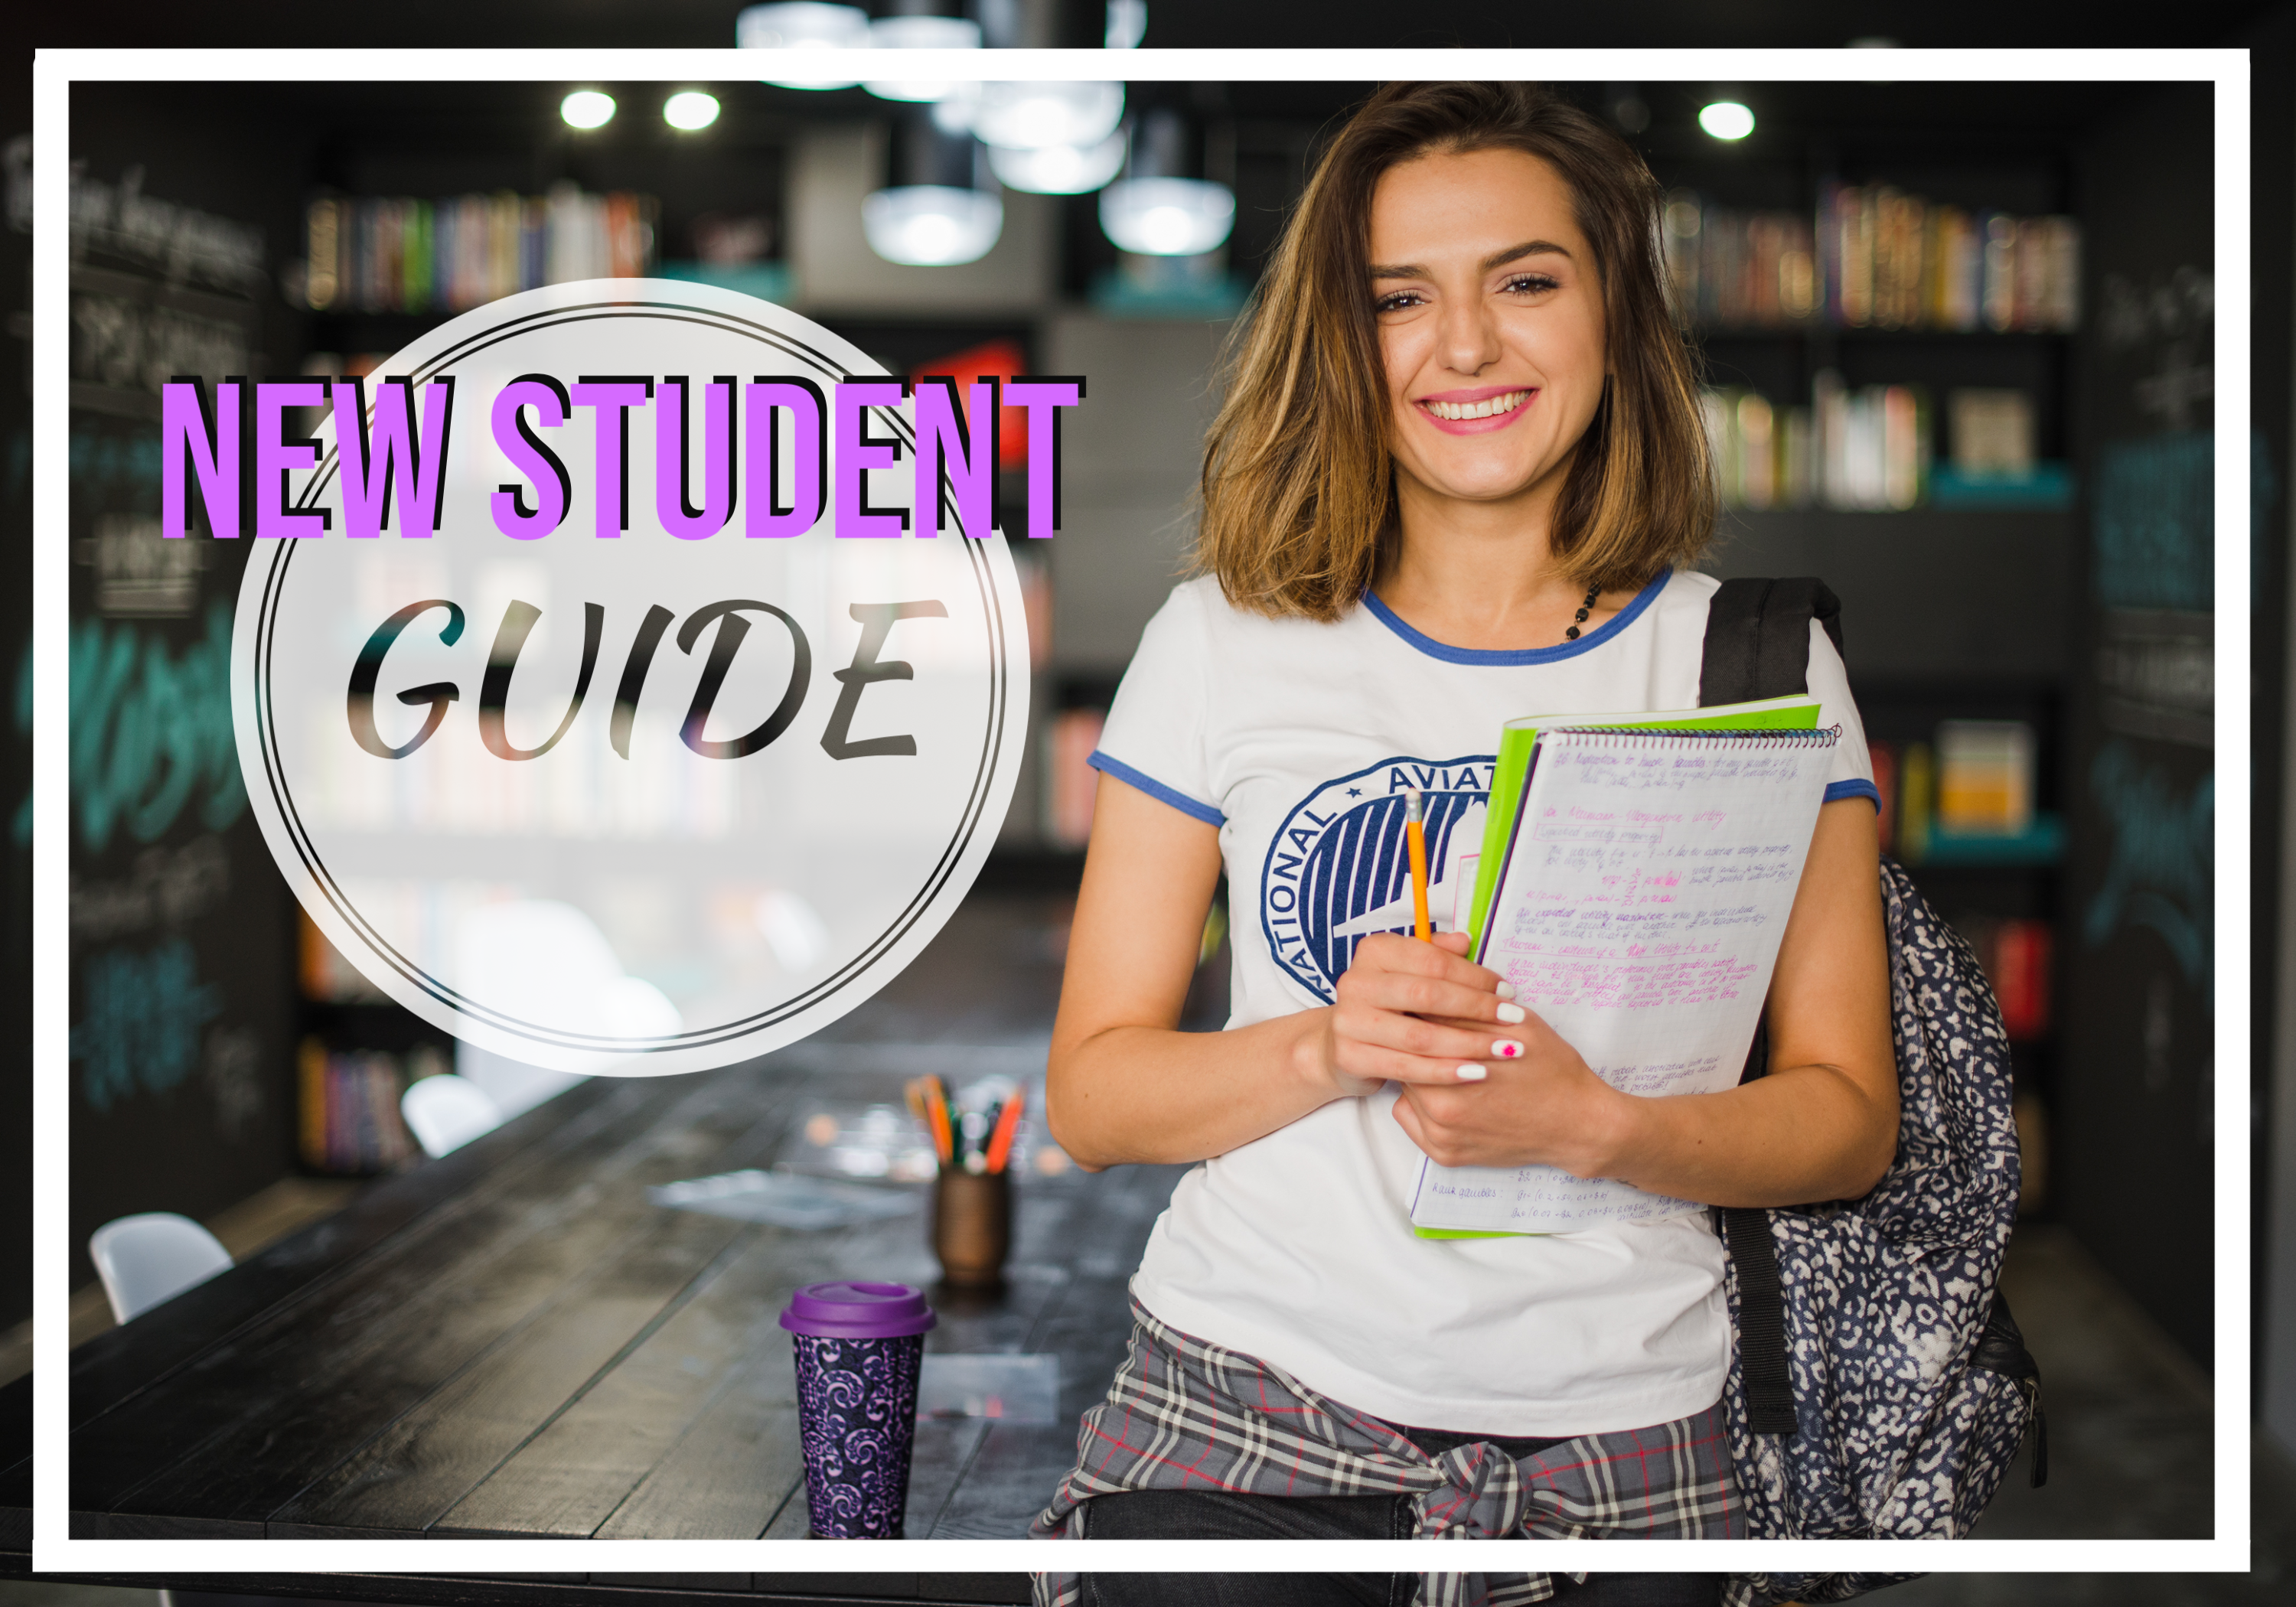 Student holding books with text "new student guide" to the left of her